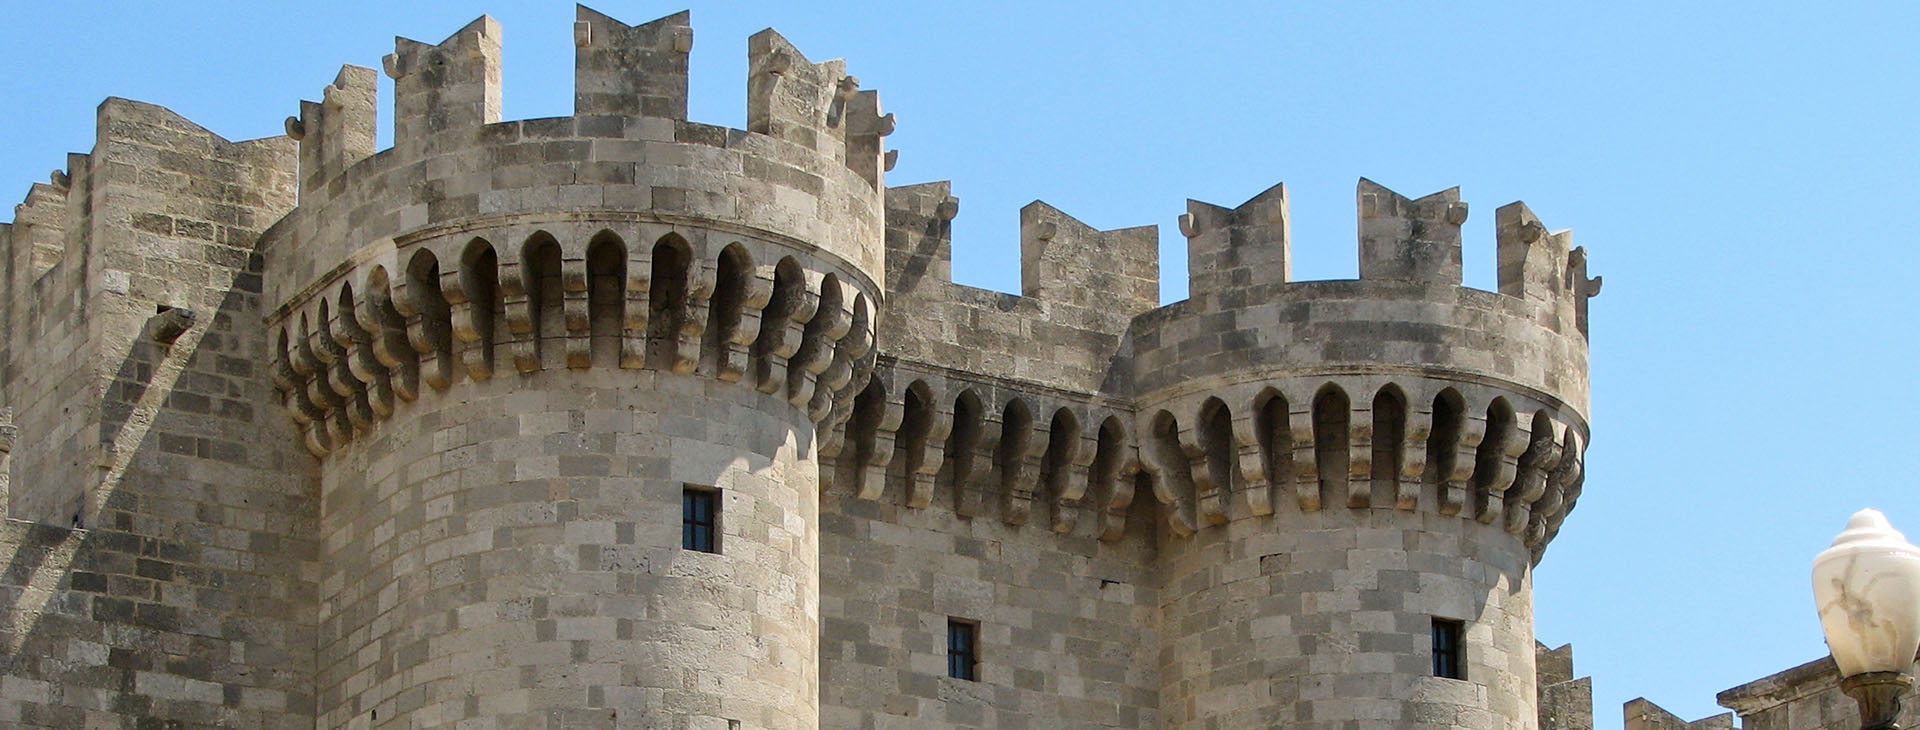 The Grand Master's Palace in Rhodes town